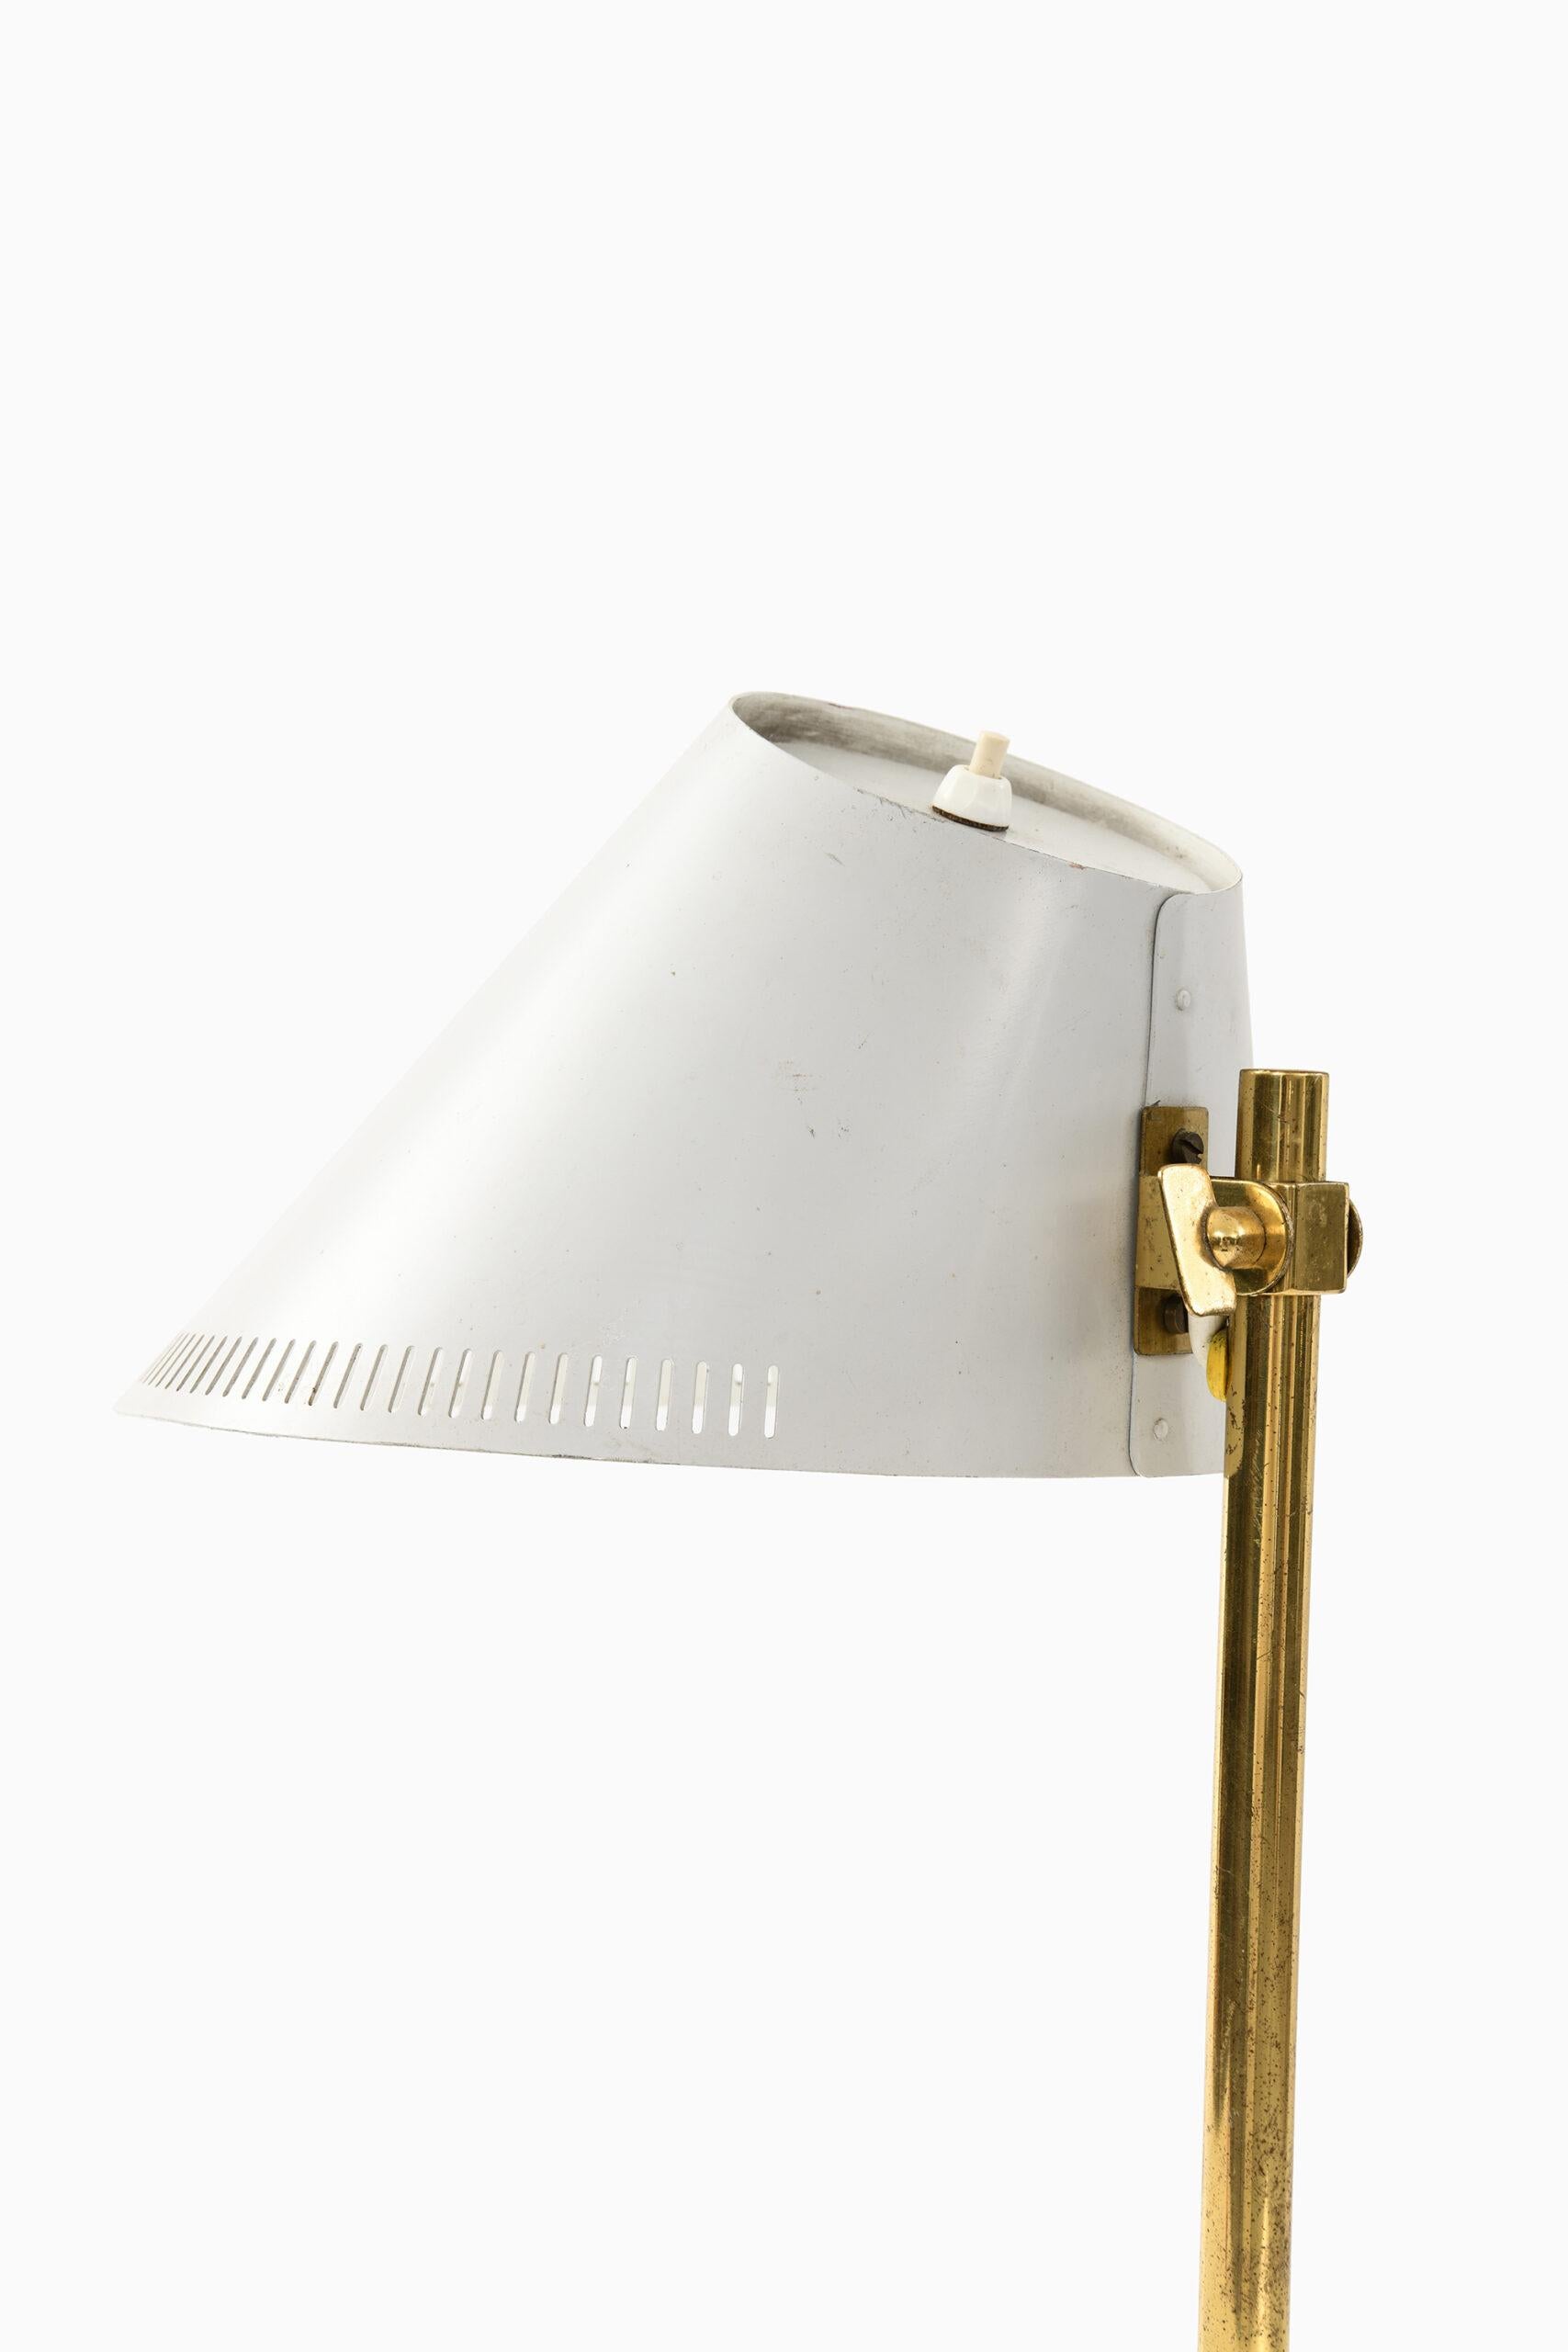 Scandinavian Modern Paavo Tynell Table Lamp Model 9227 Produced by Idman in Finland For Sale